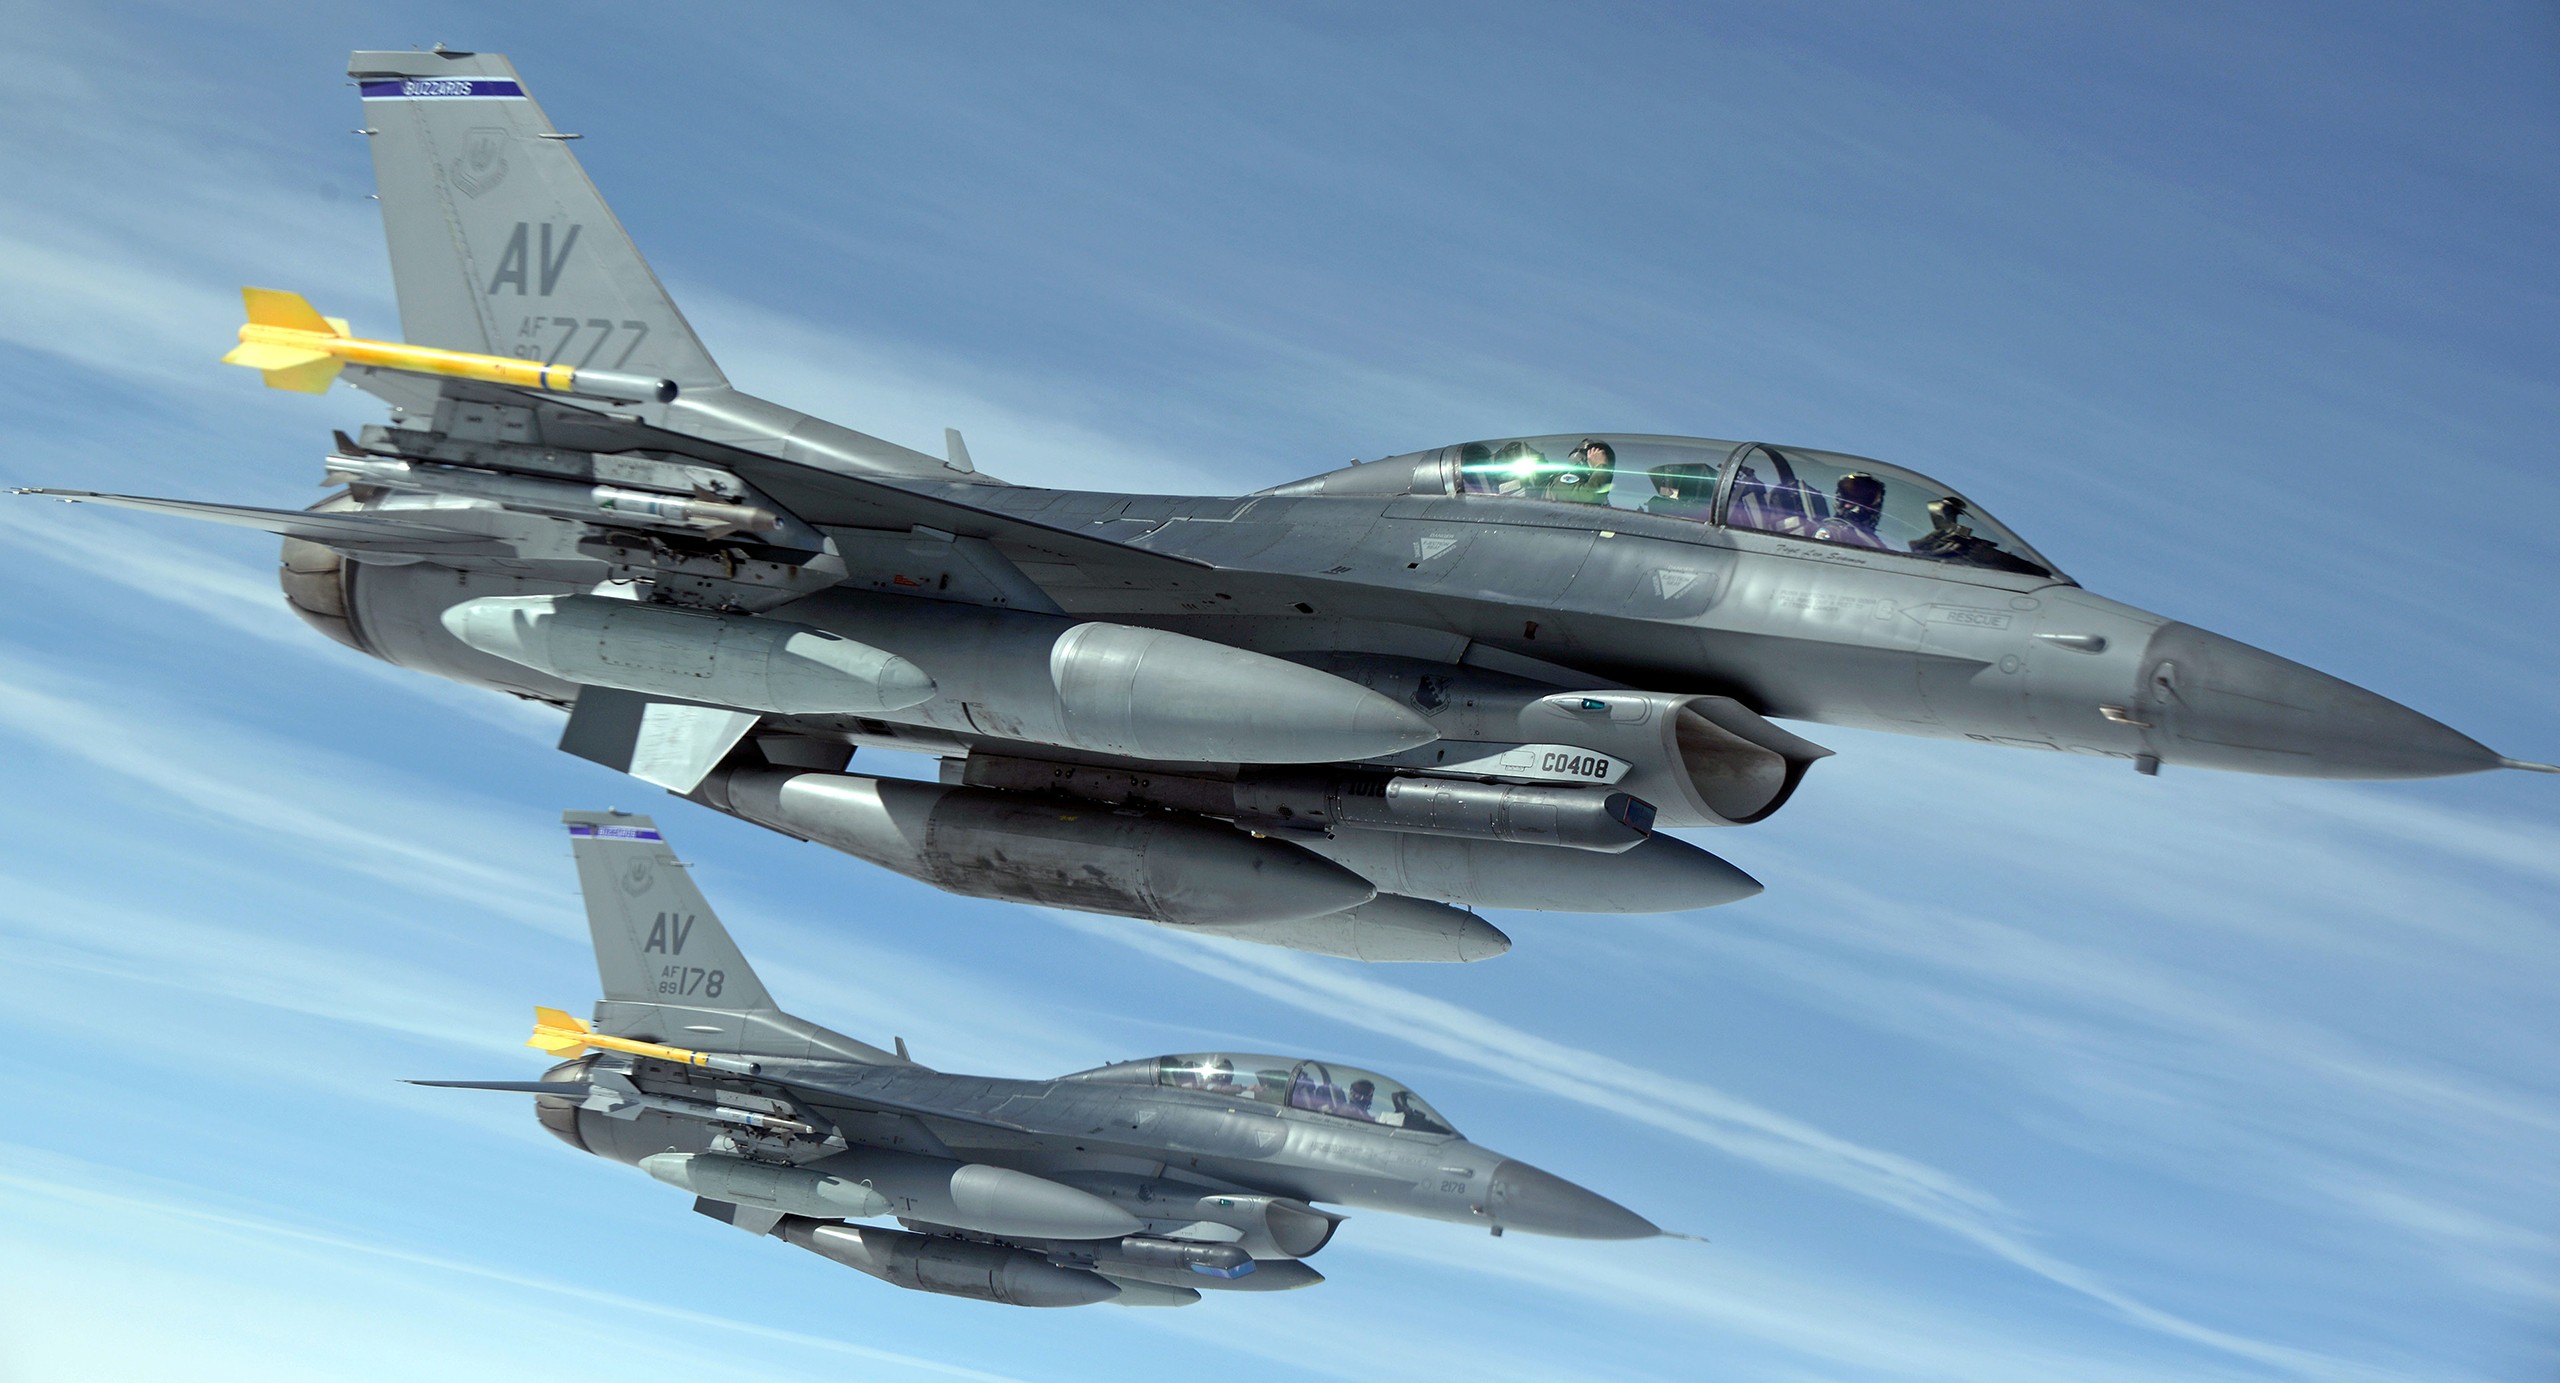 General 2560x1383 General Dynamics F-16 Fighting Falcon military aircraft aircraft military vehicle numbers vehicle military US Air Force jet fighter General Dynamics American aircraft rafale